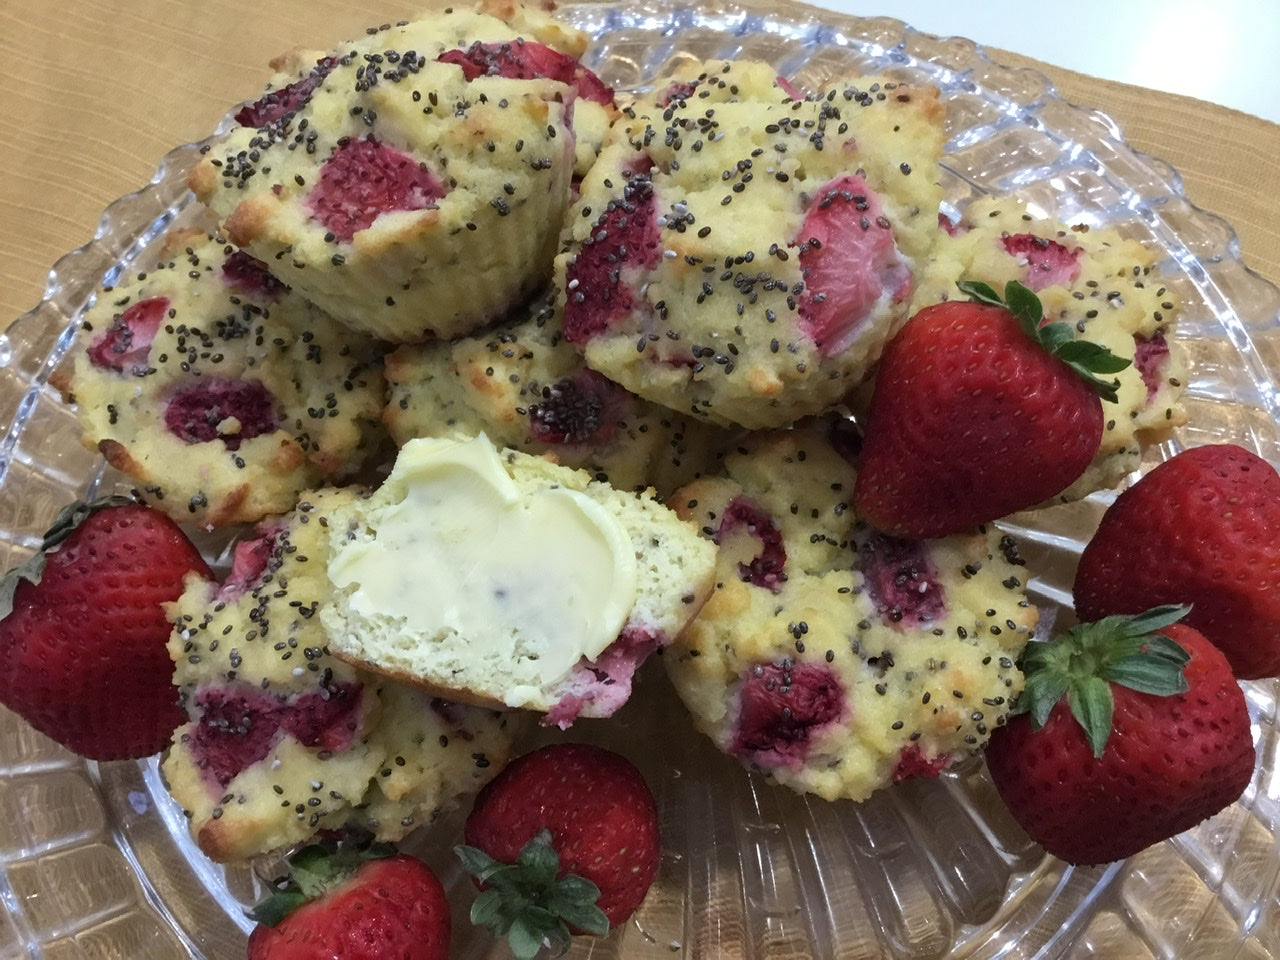 Strawberry Poppyseed Muffins - Keto Low-Carb